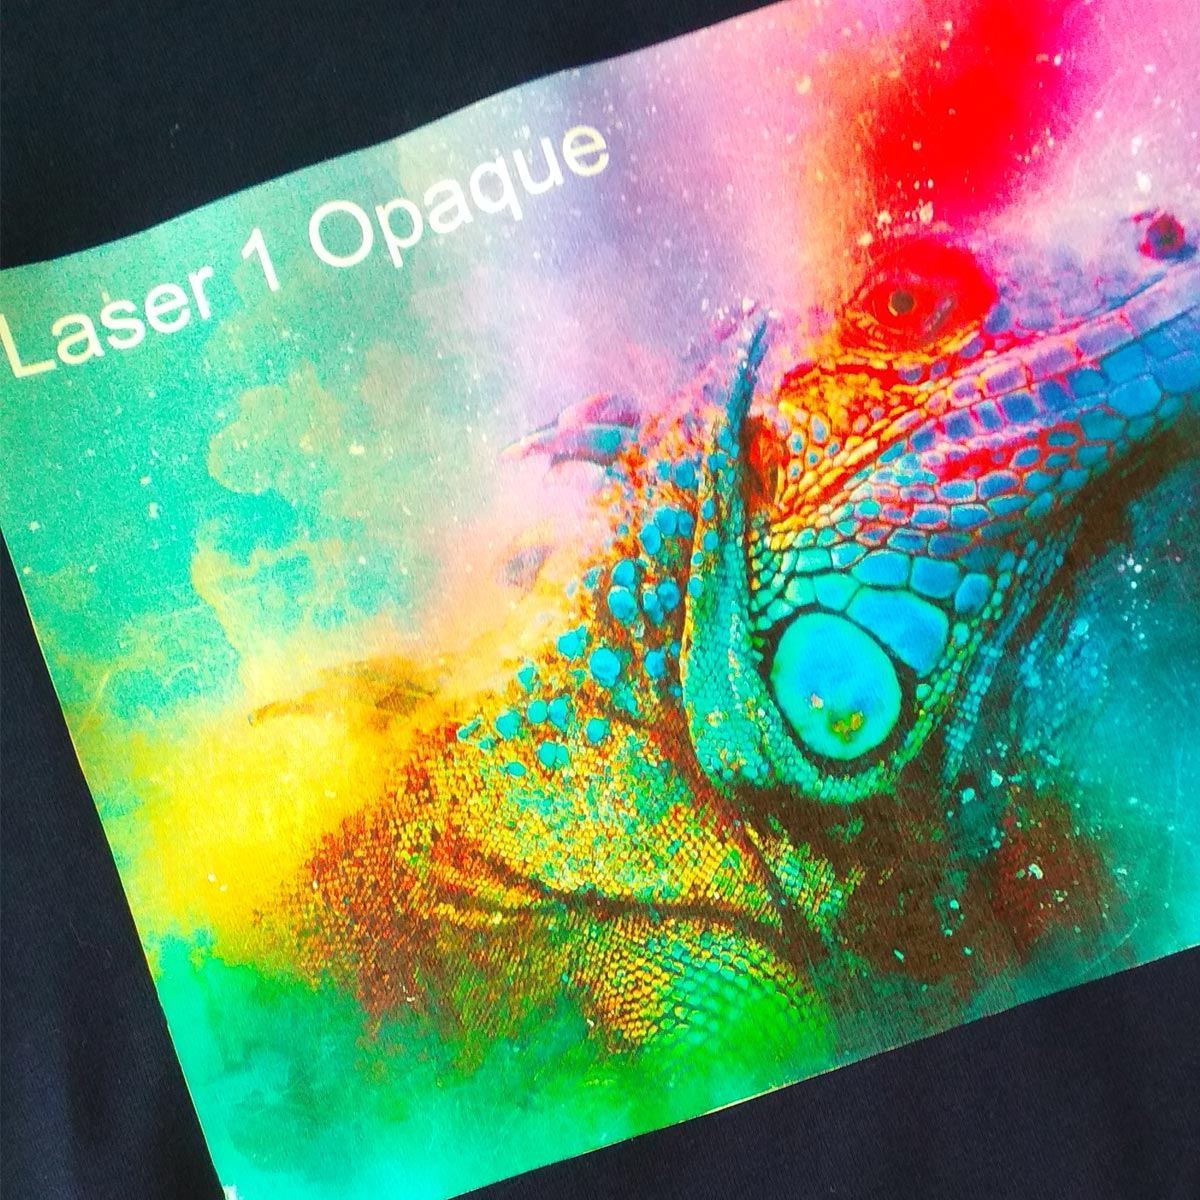 Laser 1 Opaque - Transfer paper for dark and colour textiles for laser printers - 100 sheets